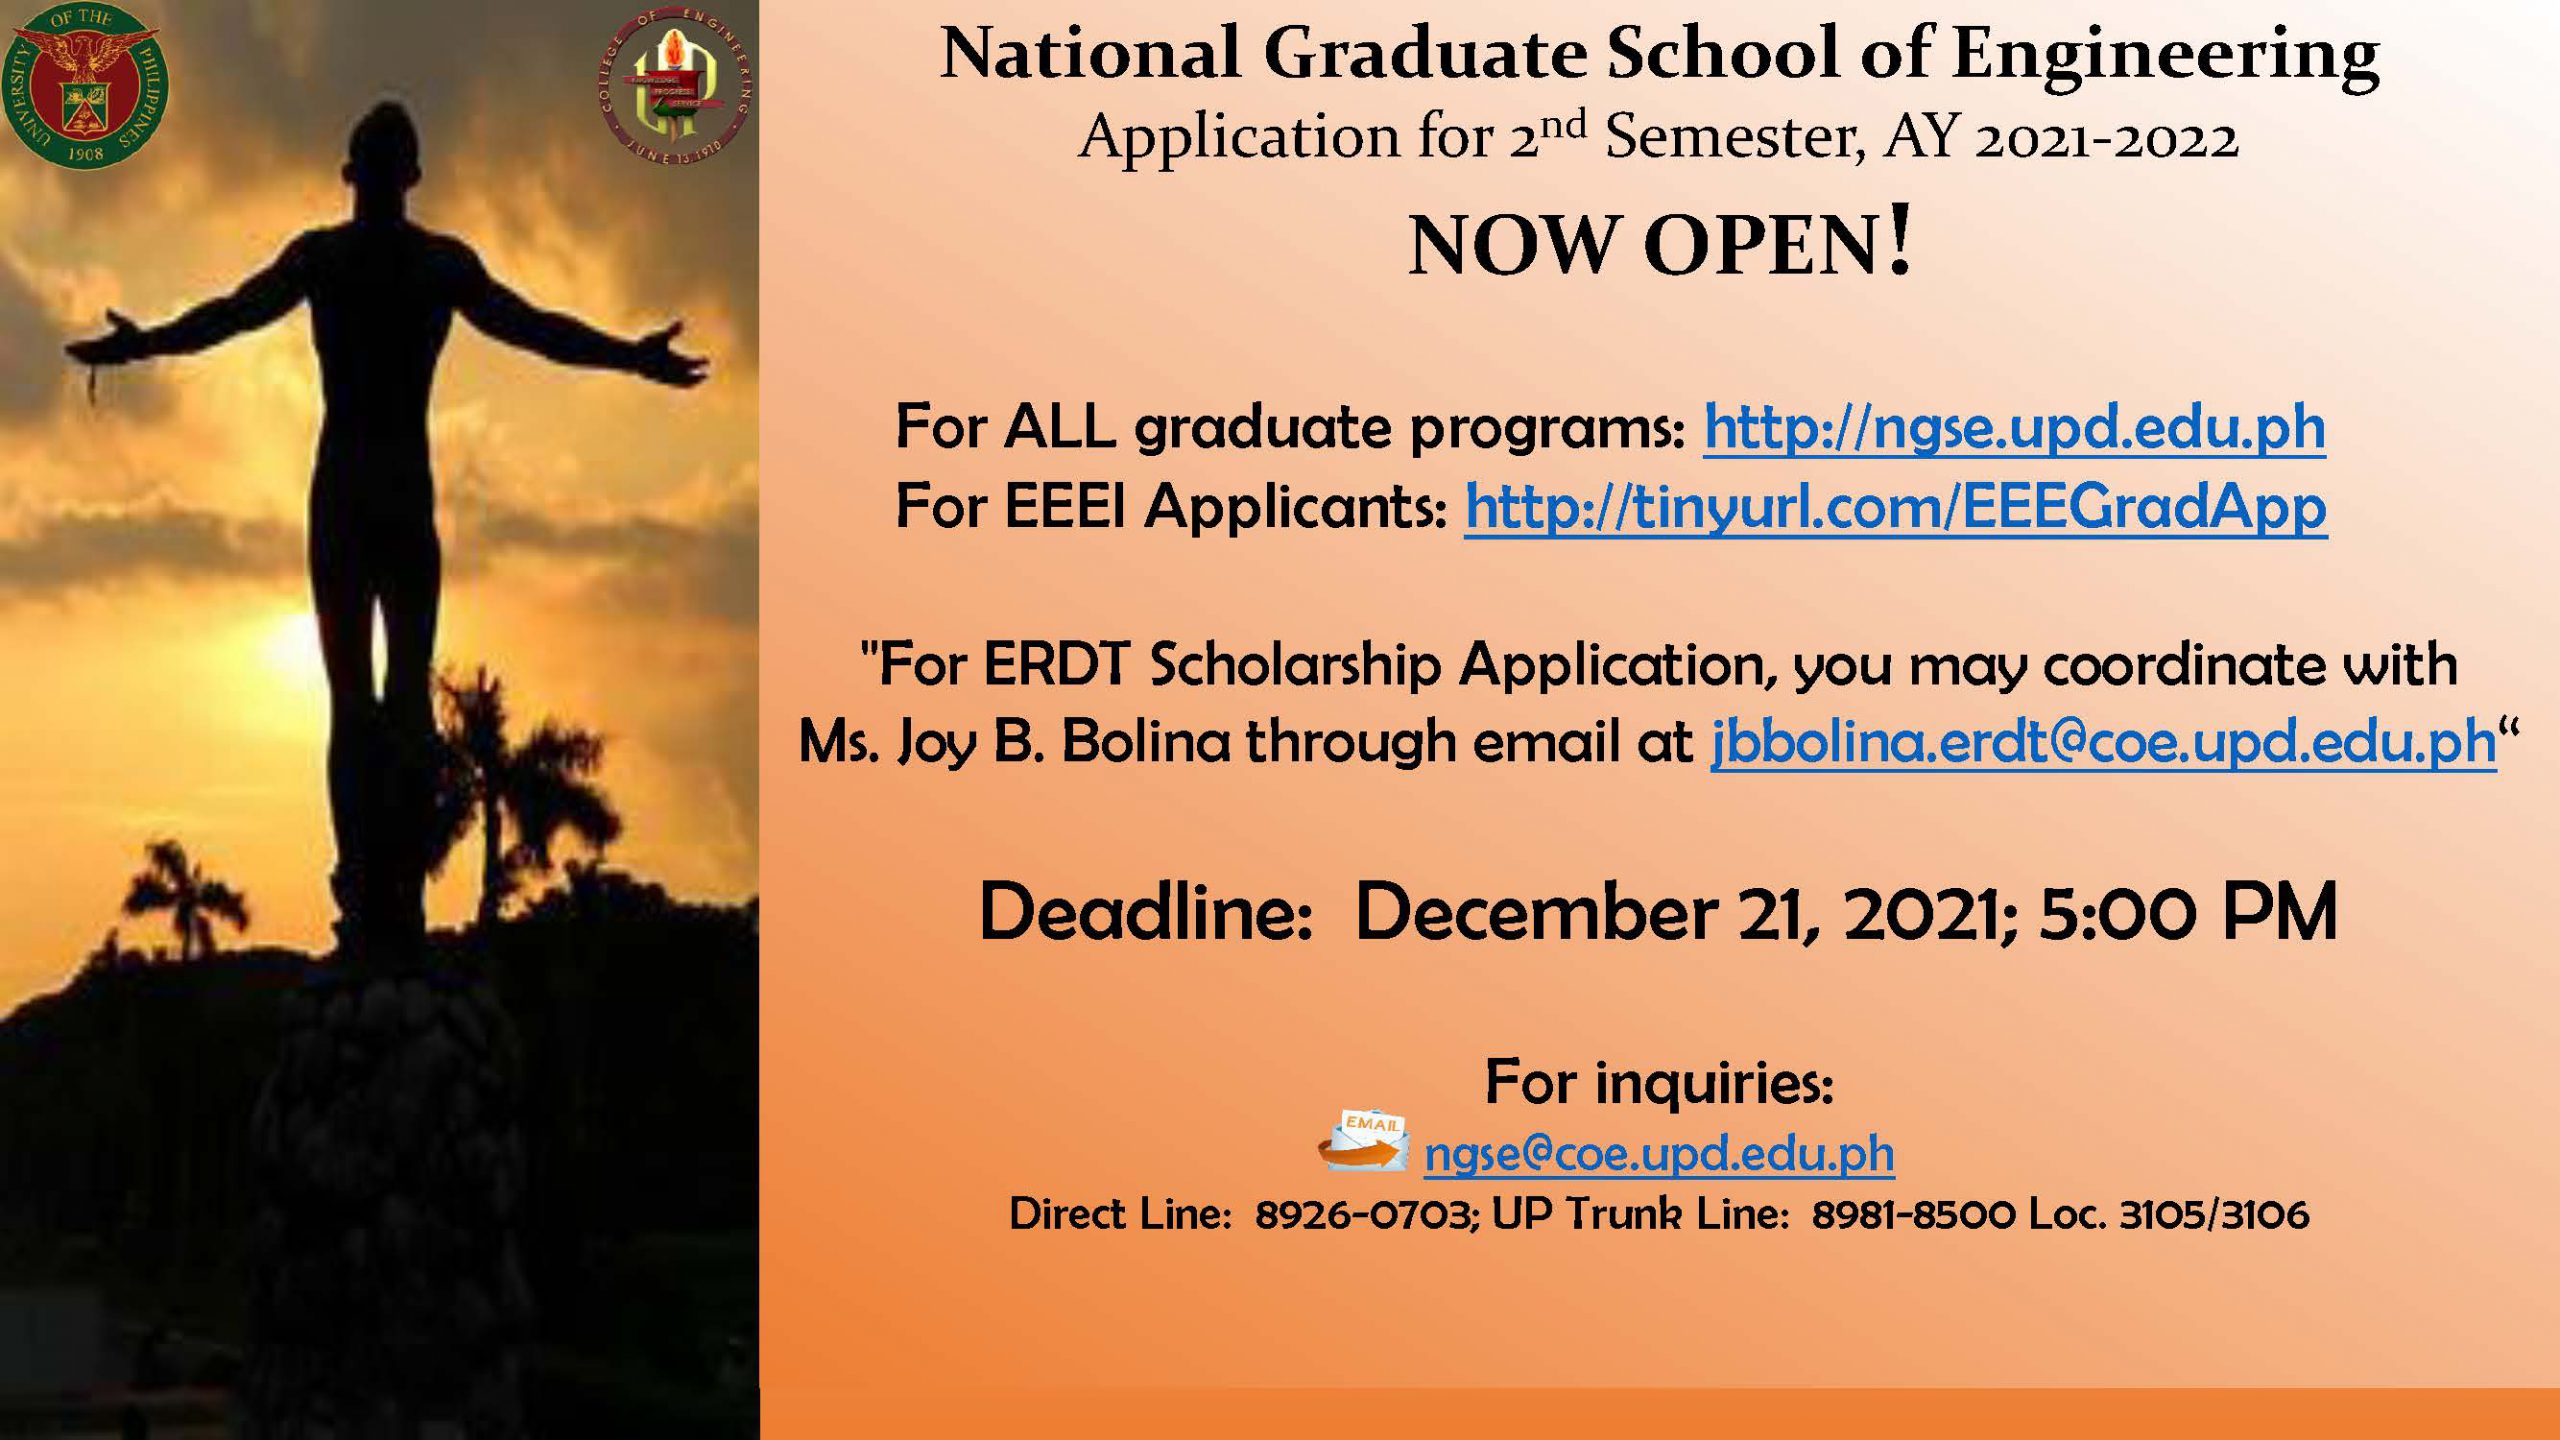 NGSE & ERDT Applications Now Open for the 2nd Semester AY 2021-2022